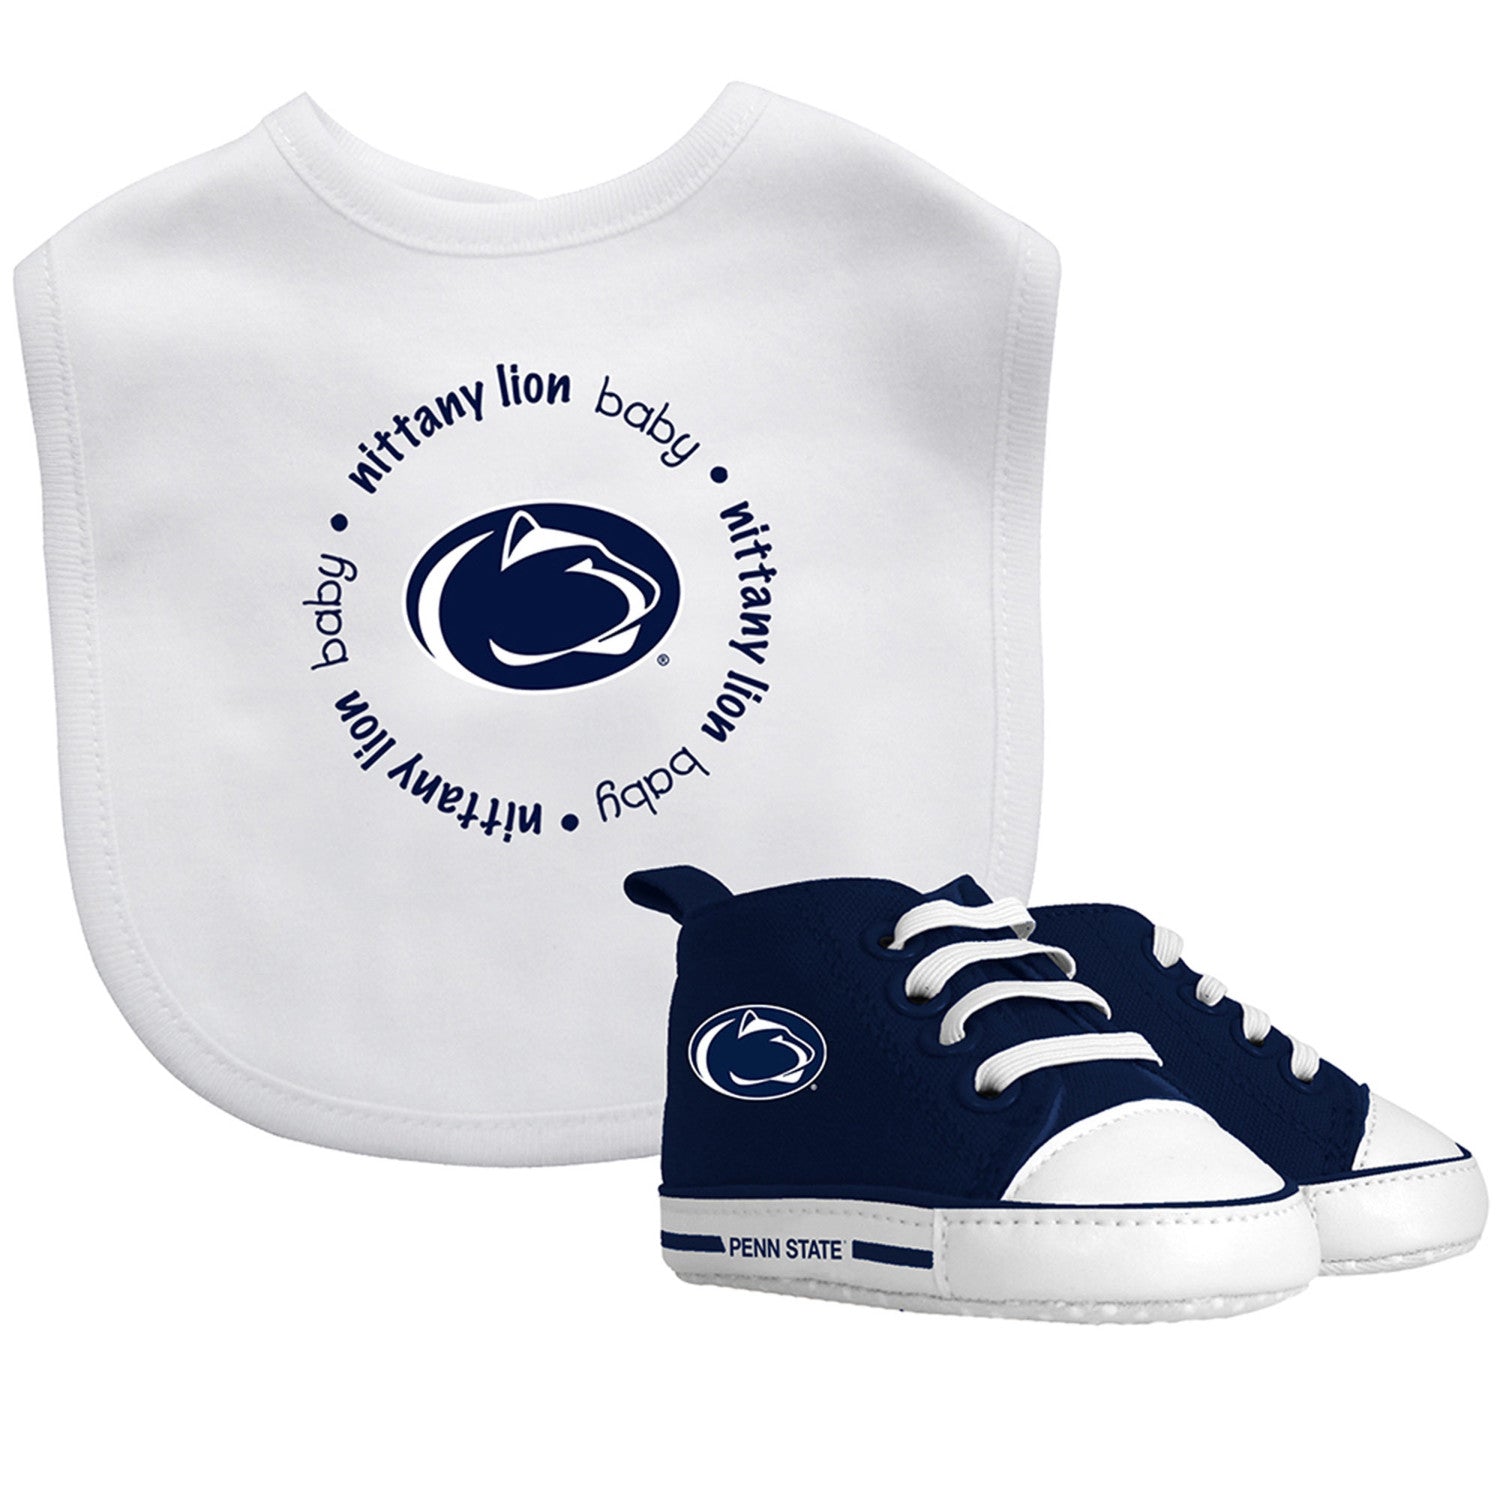 Penn State Nittany Lions - 2-Piece Baby Gift Set